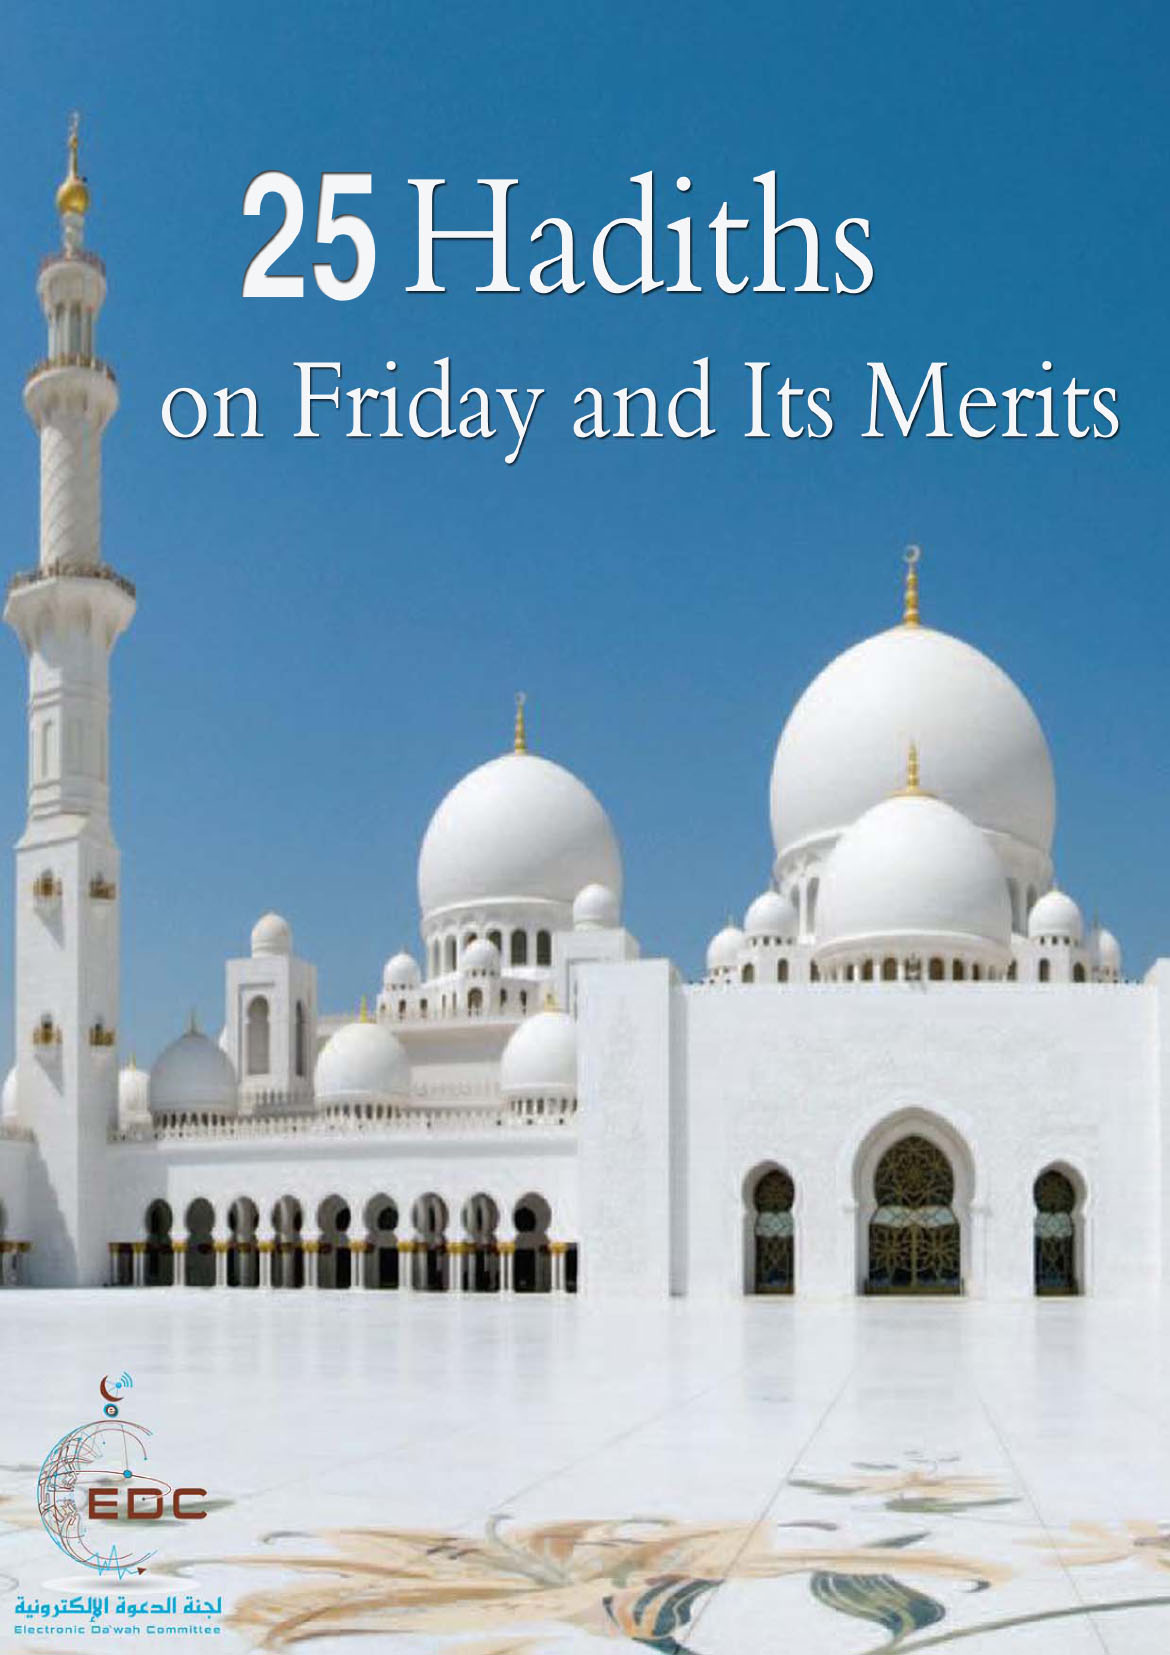 25+ Hadiths on Friday and Its Merits